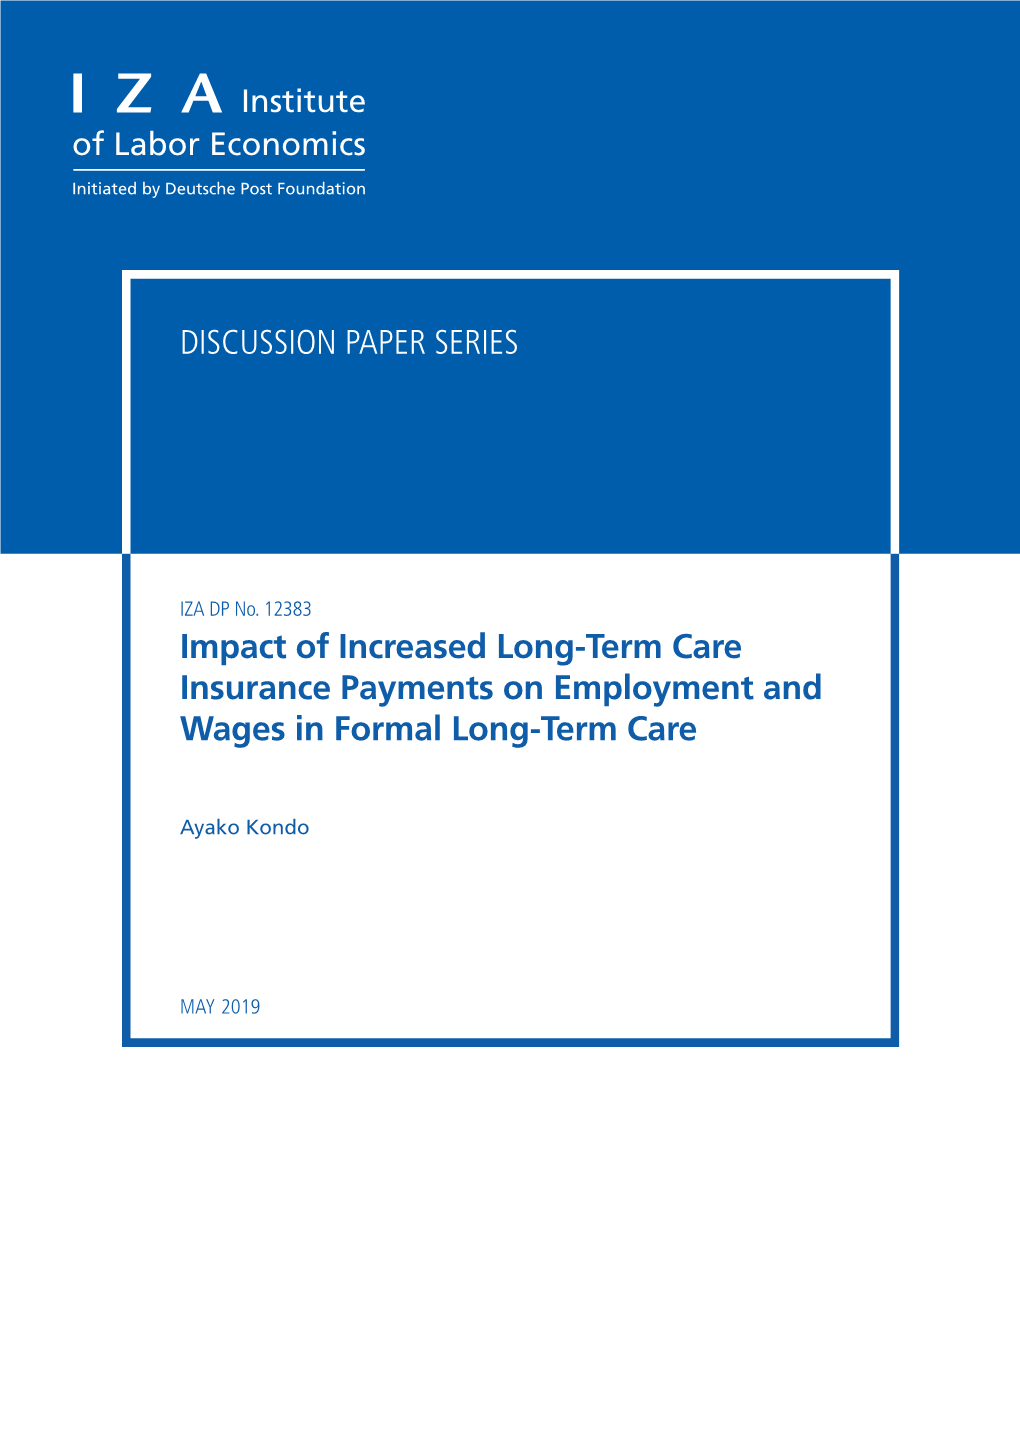 Impact of Increased Long-Term Care Insurance Payments on Employment and Wages in Formal Long-Term Care